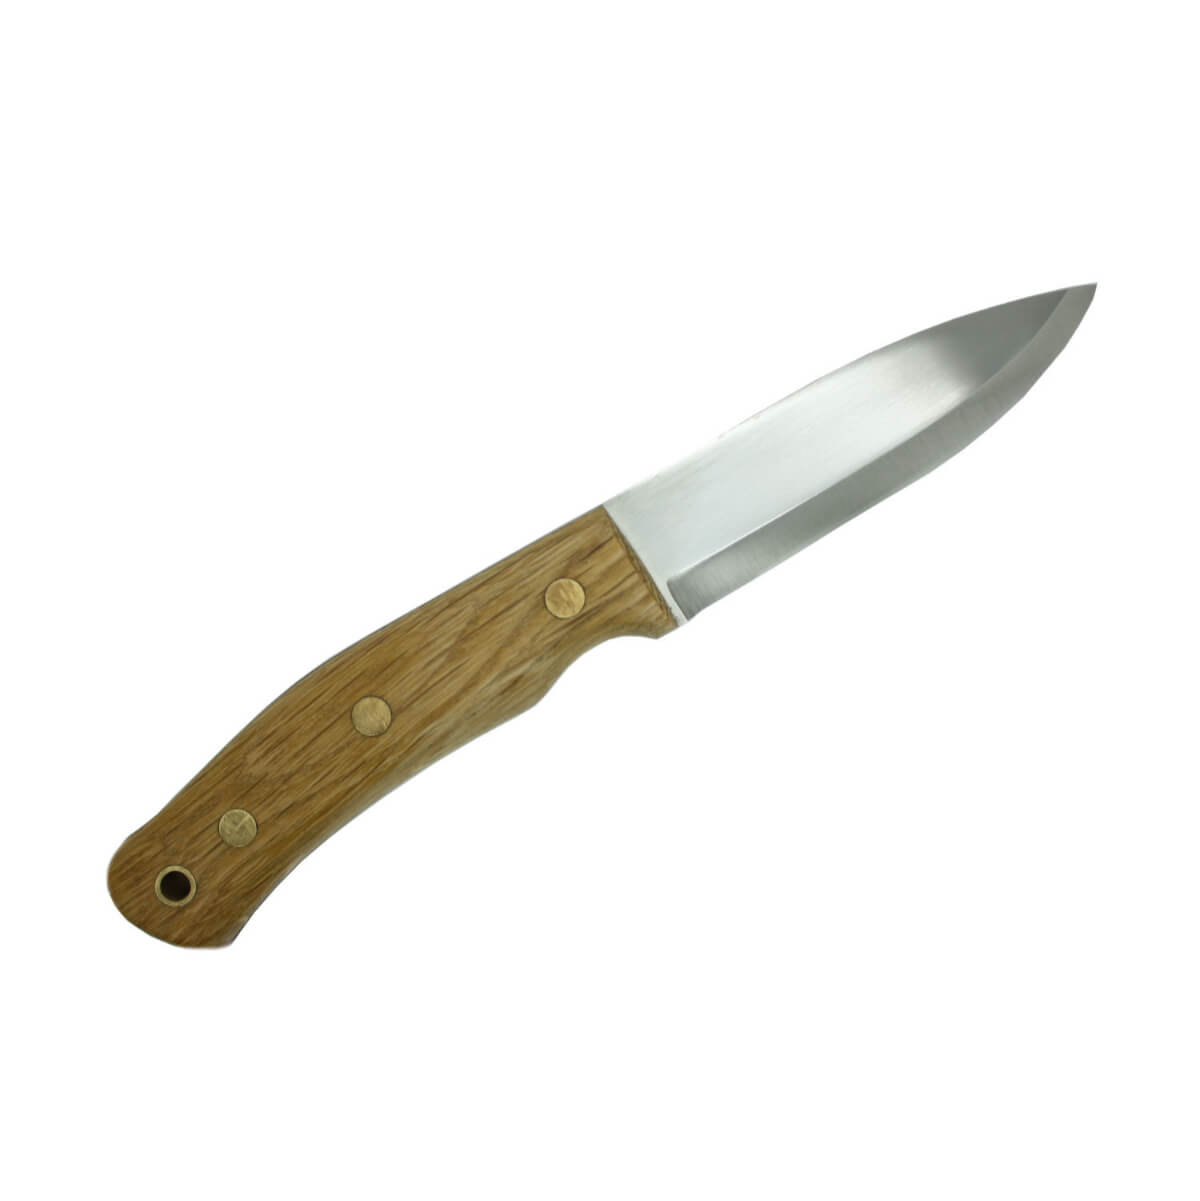 Casstrom No.10 Forest Knife with an oak handle